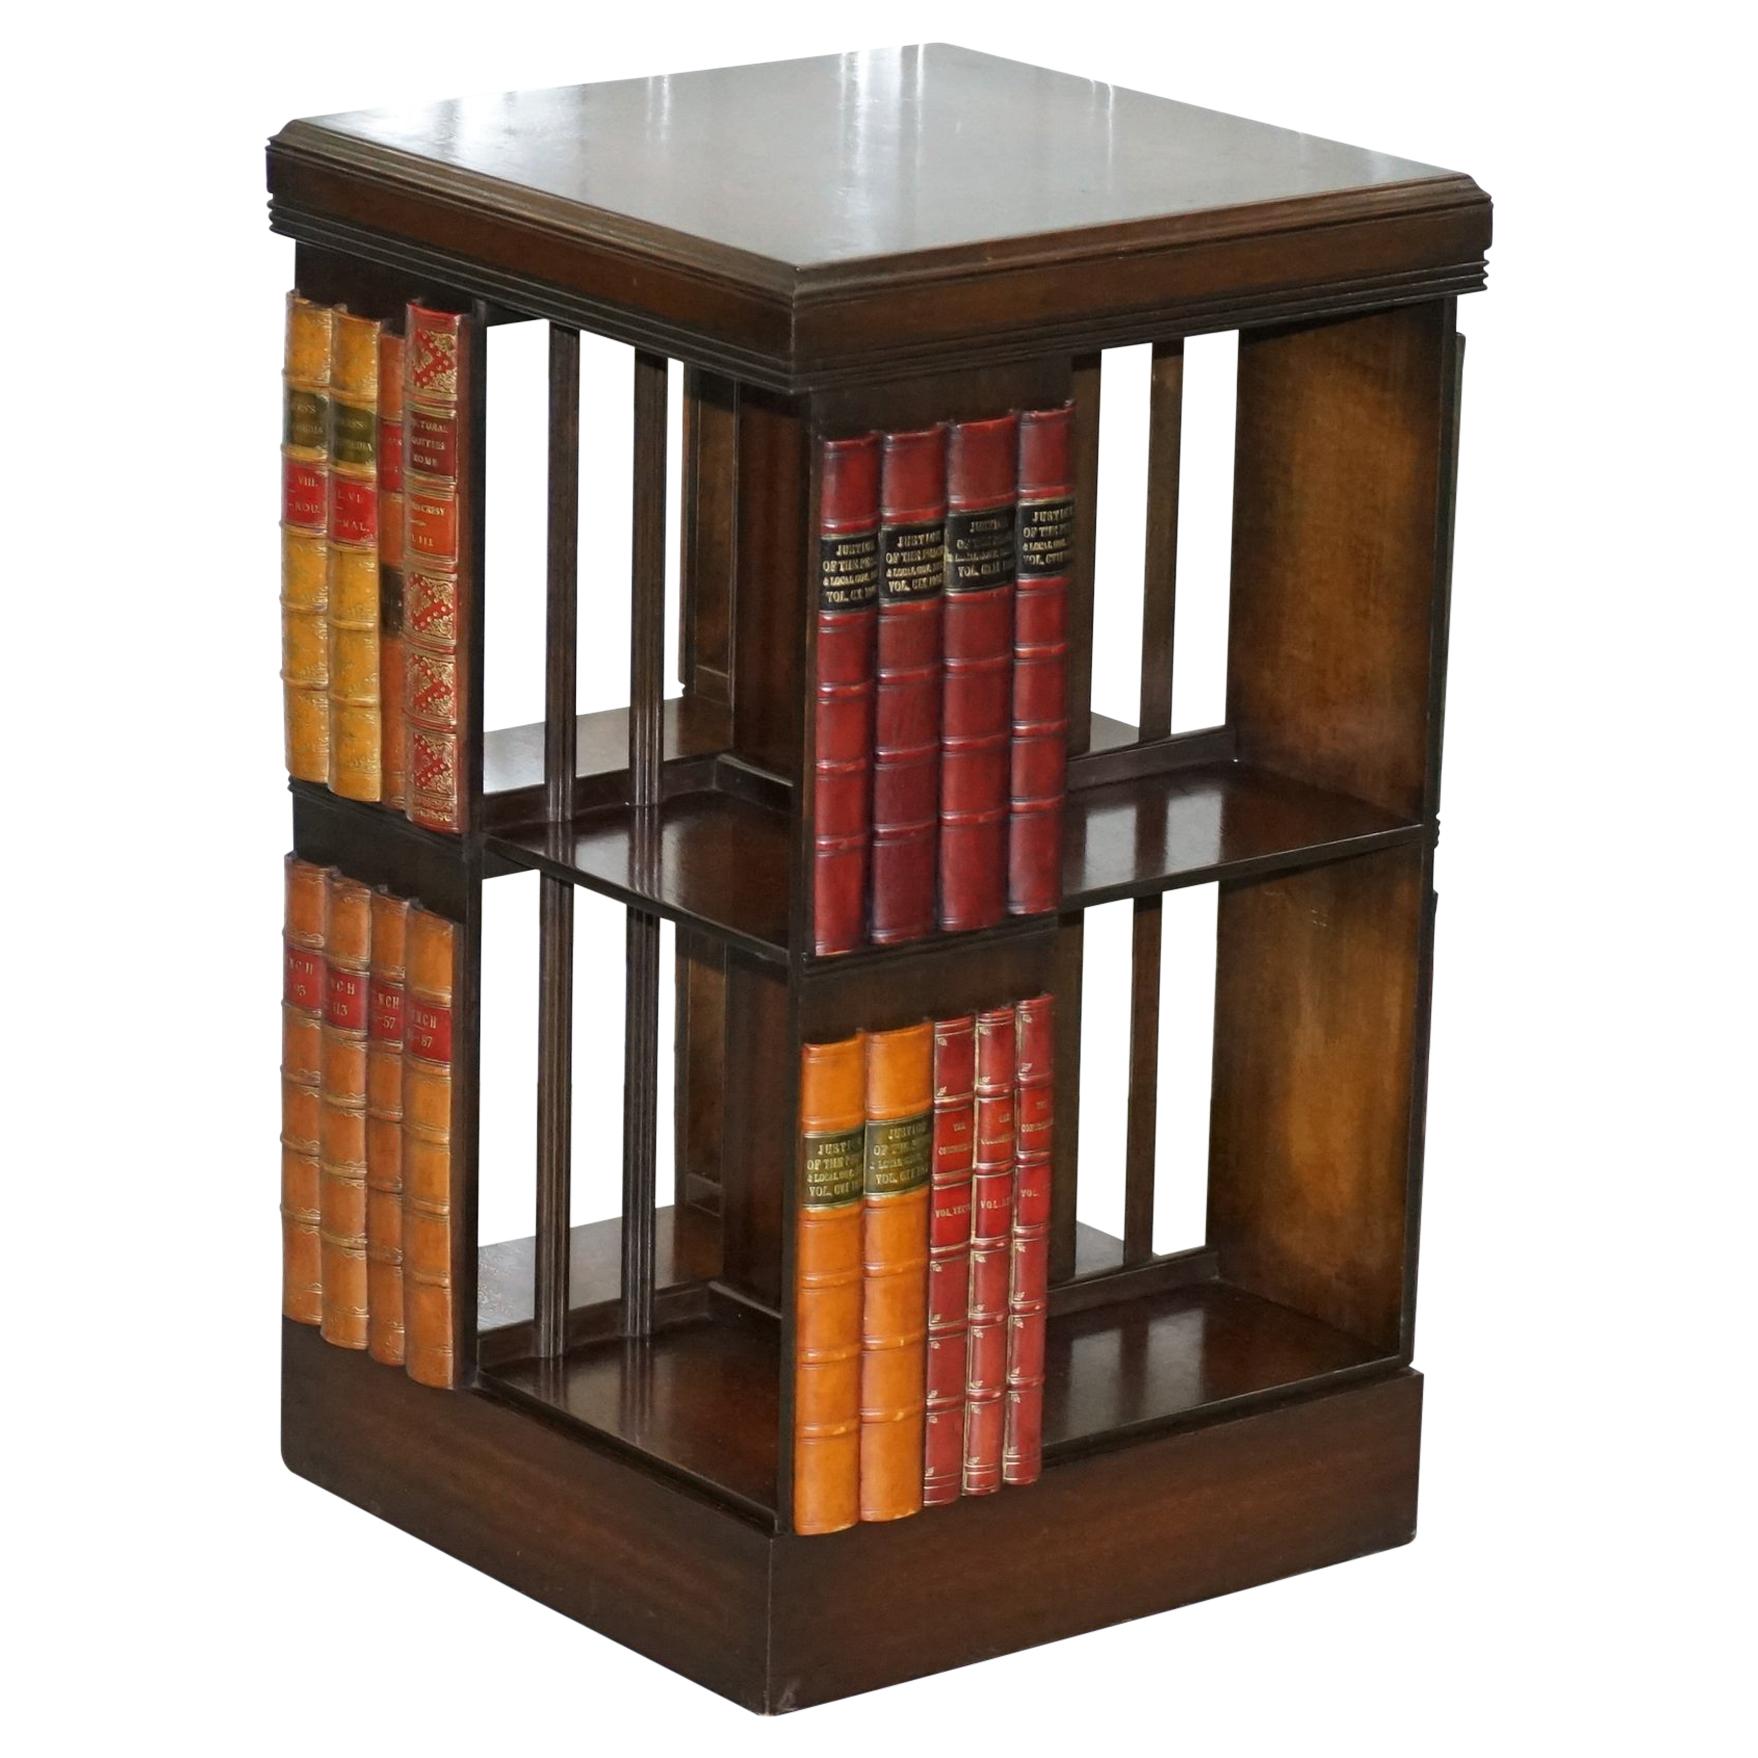 Stunning Vintage Mahogany Revolving Swivel Bookcase on Wheels with Faux Books